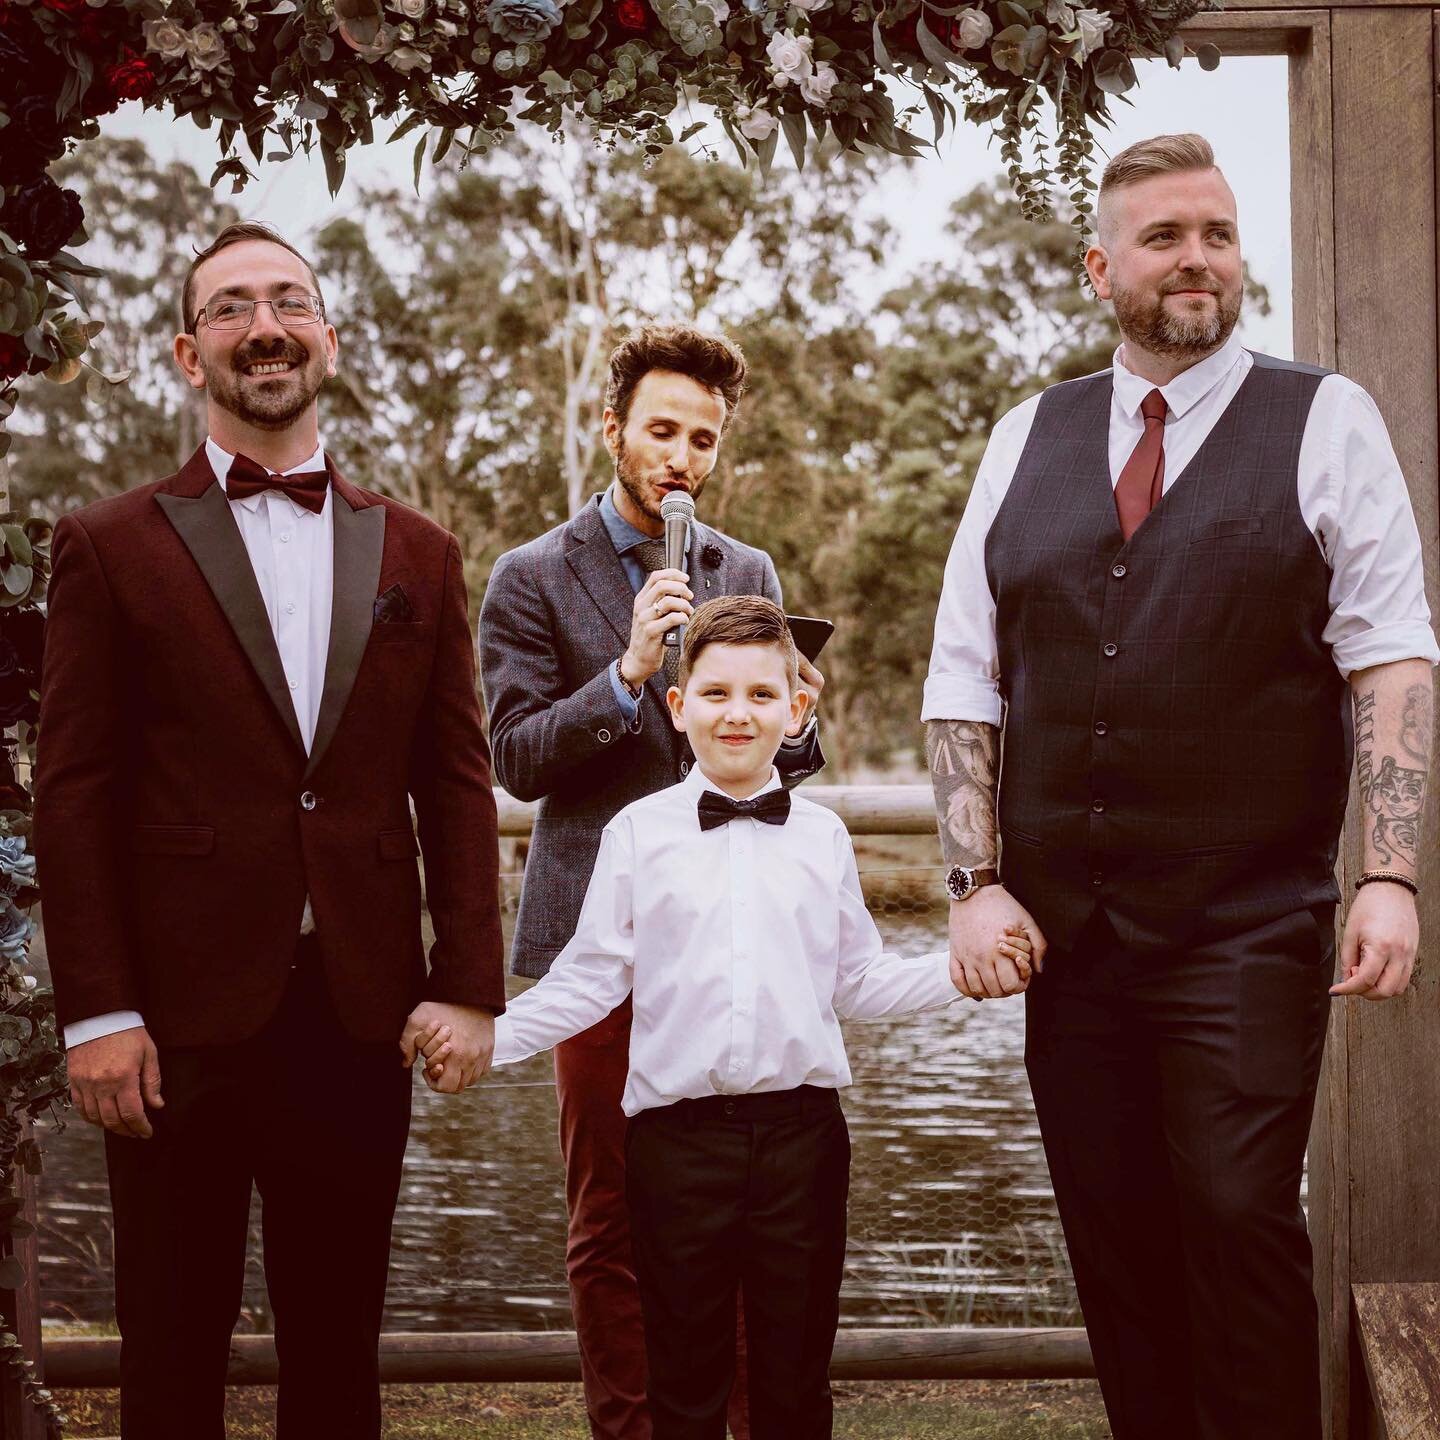 Love this pic - including little Elliot in the ceremony was so cute. Congrats gents to the next chapter 🥳🎉😍 
.
.
#weddingceremony #instawedding #mrandmr #boysgotmarried #weddingday #loveislove 🌈